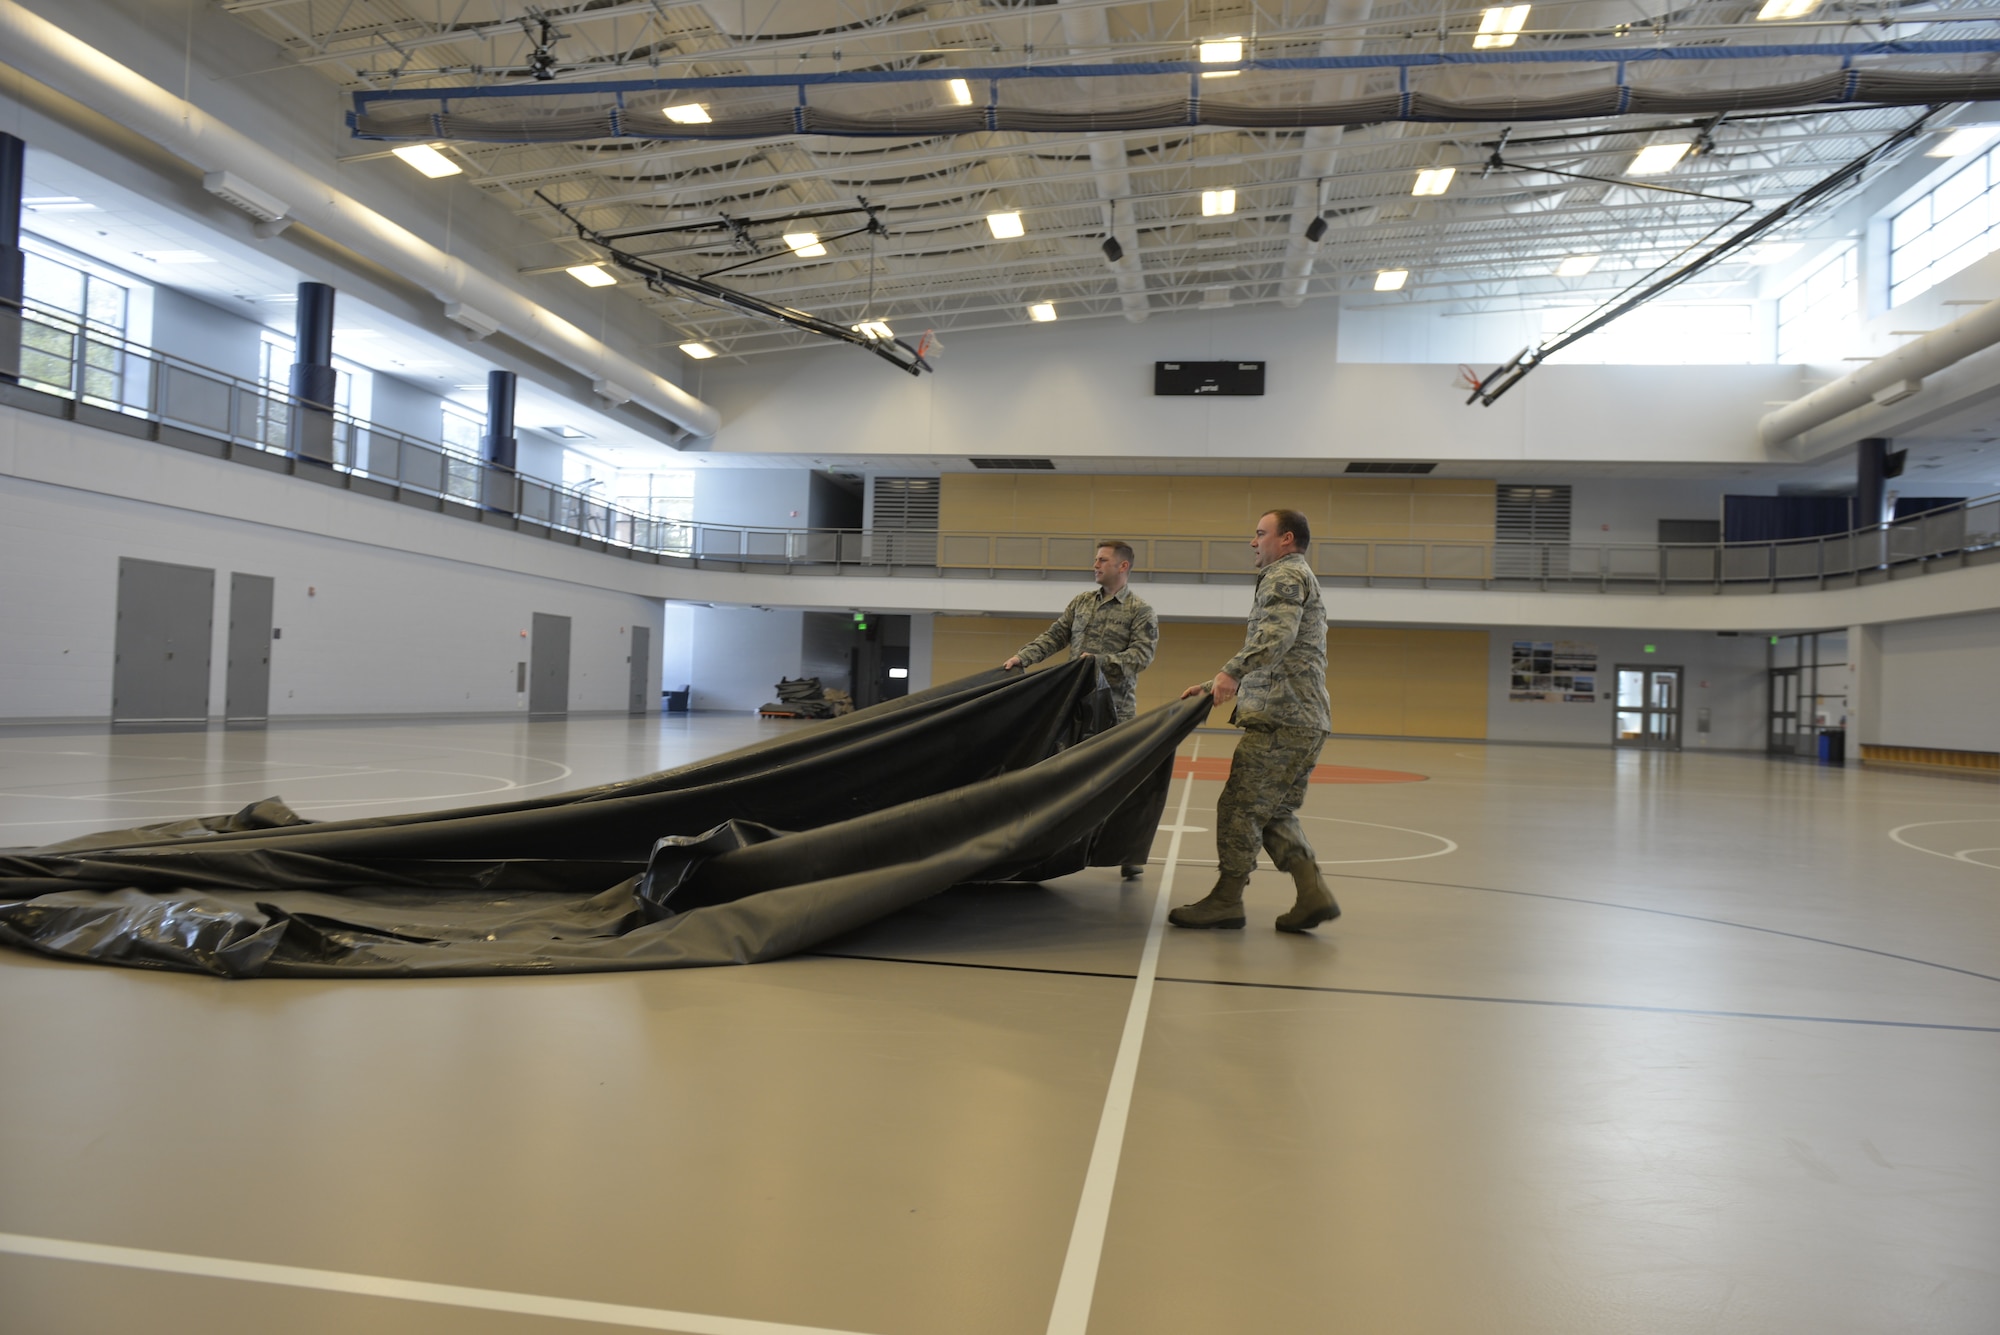 Tech. Sgt. Mark Quinn and Tech. Sgt. Lance Whitehill, assigned to the 157th Civil Engineer Squadron, New Hampshire Air National Guard, prepare the Hamel Recreational Center floor for medical equipment at the University of New Hampshire, March 25. The facility in Durham will augment area hospitals treating COVID-19 cases, if necessary. It is one of nine "surge" locations the NH Guard, in coordination with local and state healthcare agencies, plans to set up and manage across the state. (U.S. Air National Guard photo by Tech. Sgt. Aaron Vezeau)